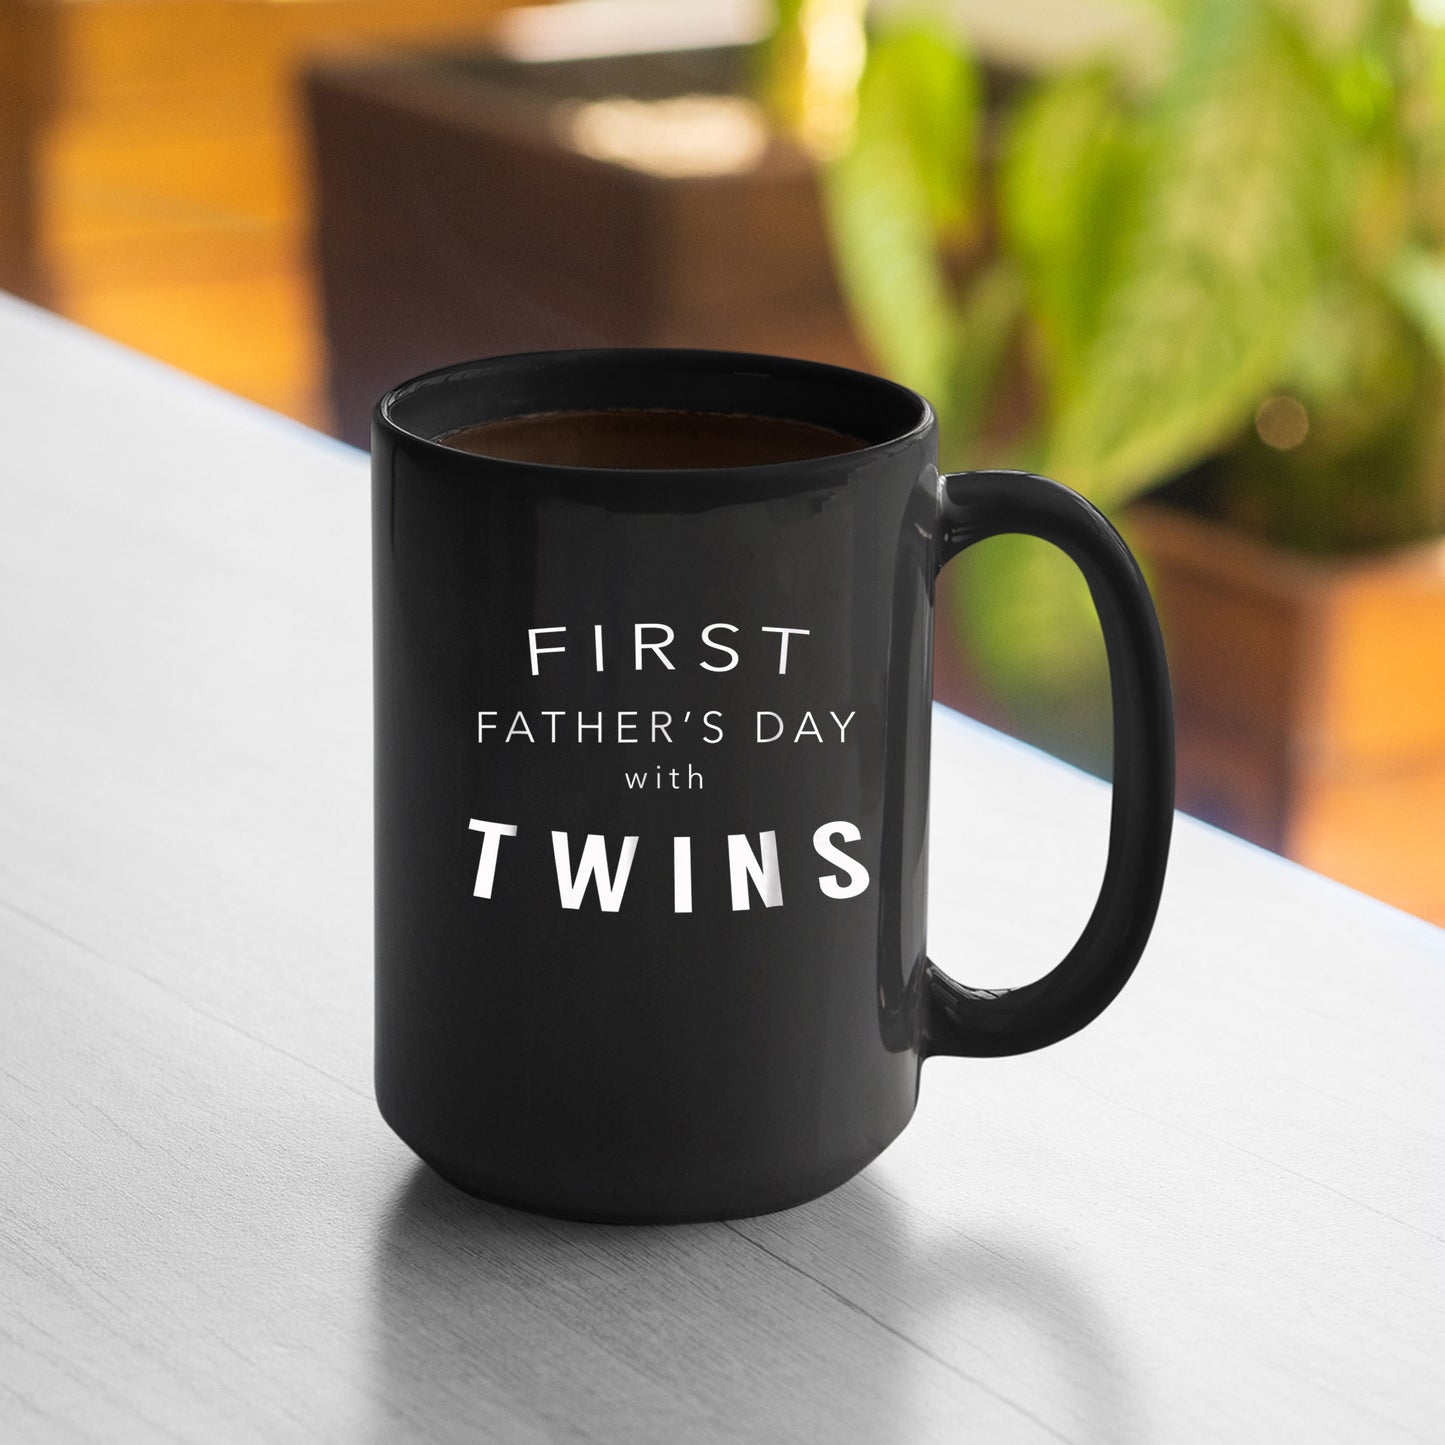 First Fathers Day Mug First Fathers Day with Twins  Gift for Dad of Twins Mug , 11oz or 15oz, Happy Fathers Day Gift Ideas For Dad